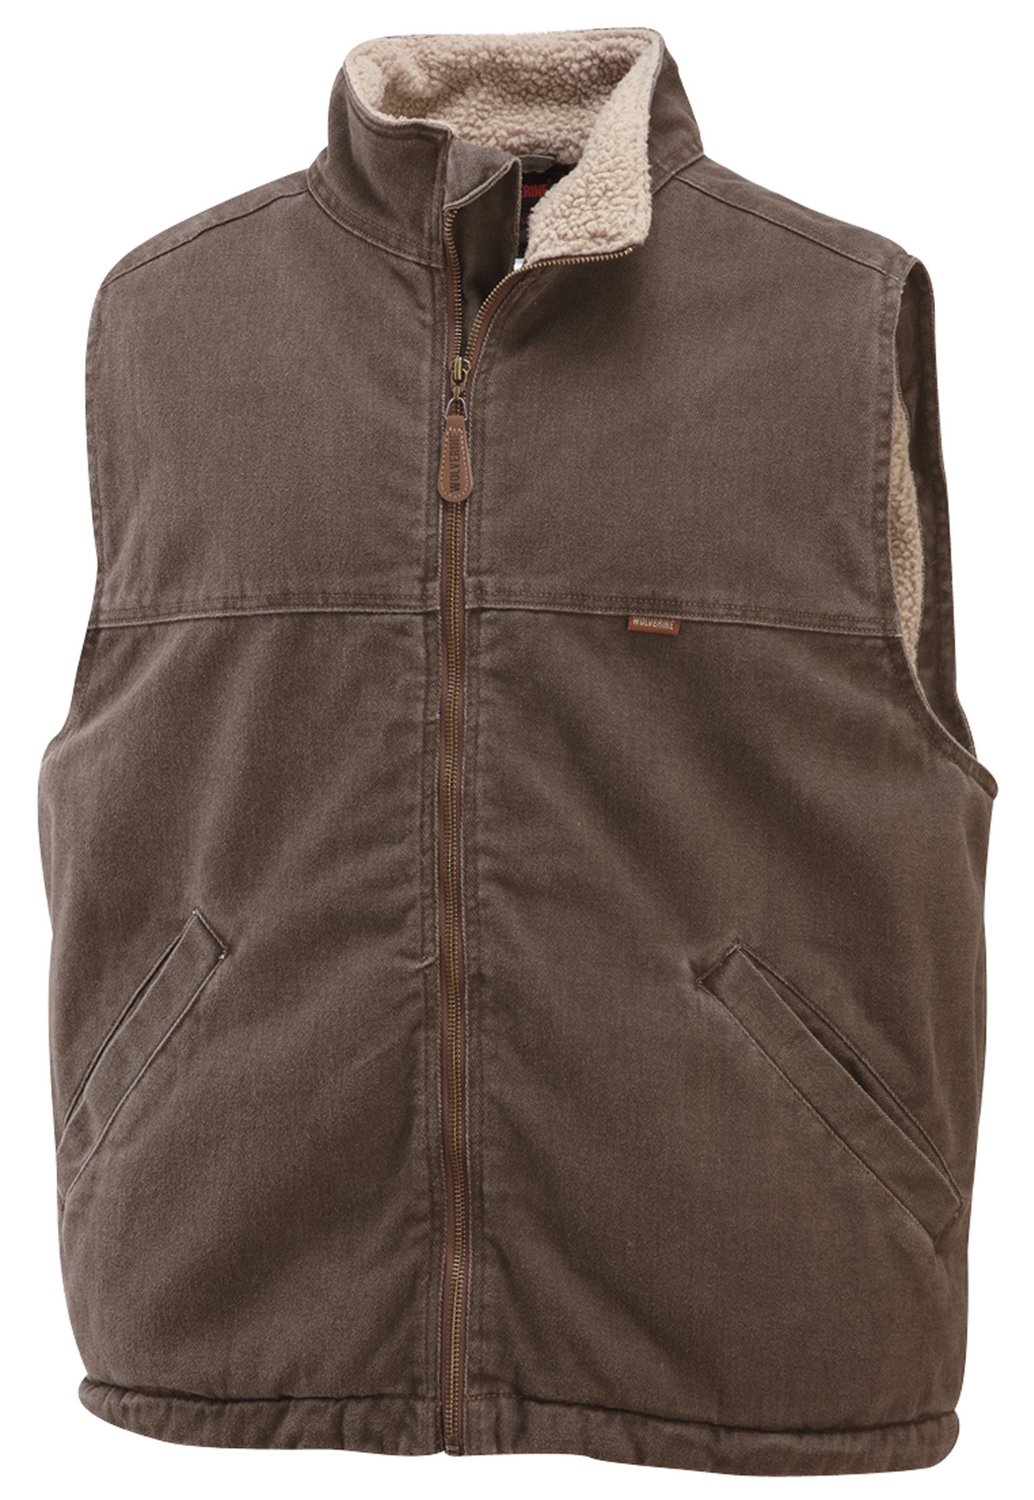 Wolverine Men's Upland Vest | Free Shipping at Academy